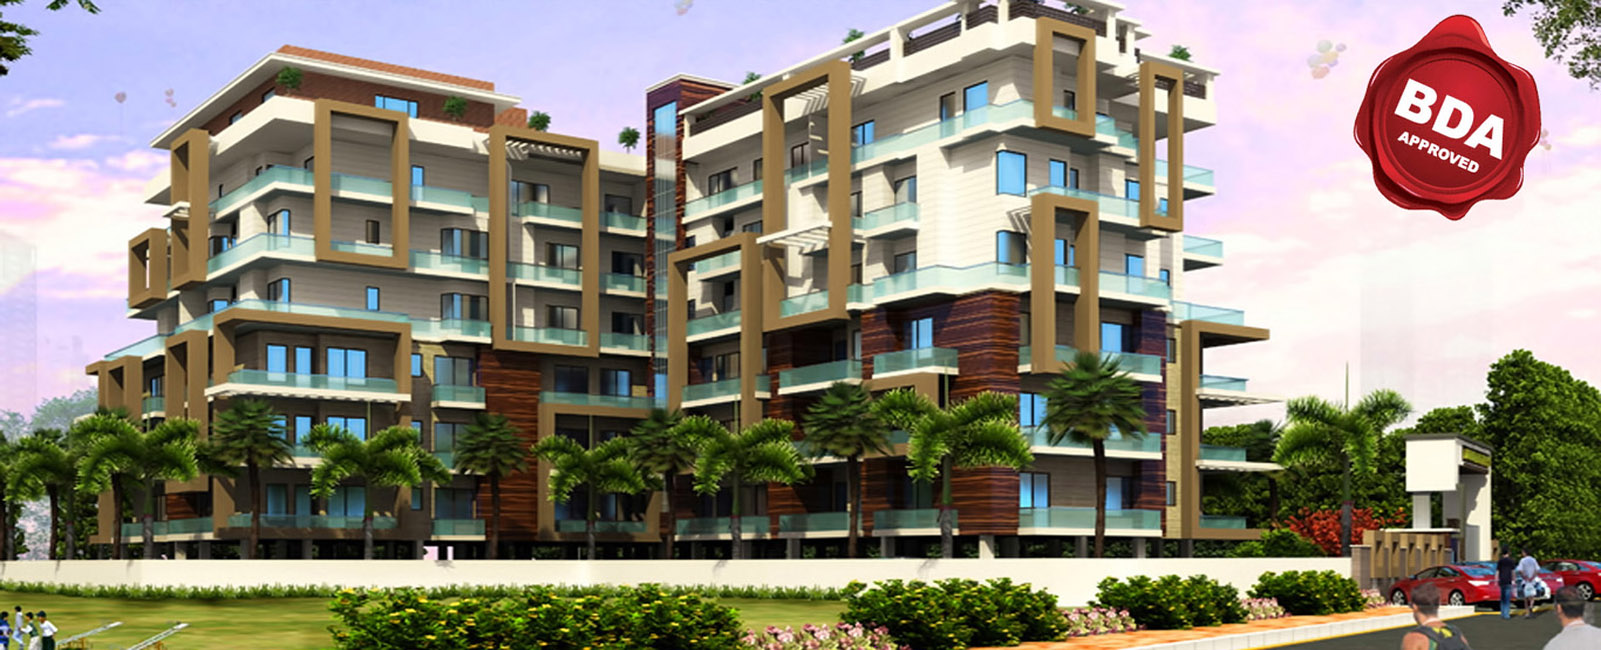 Bda Approved Apartments/flats in Bareilly City